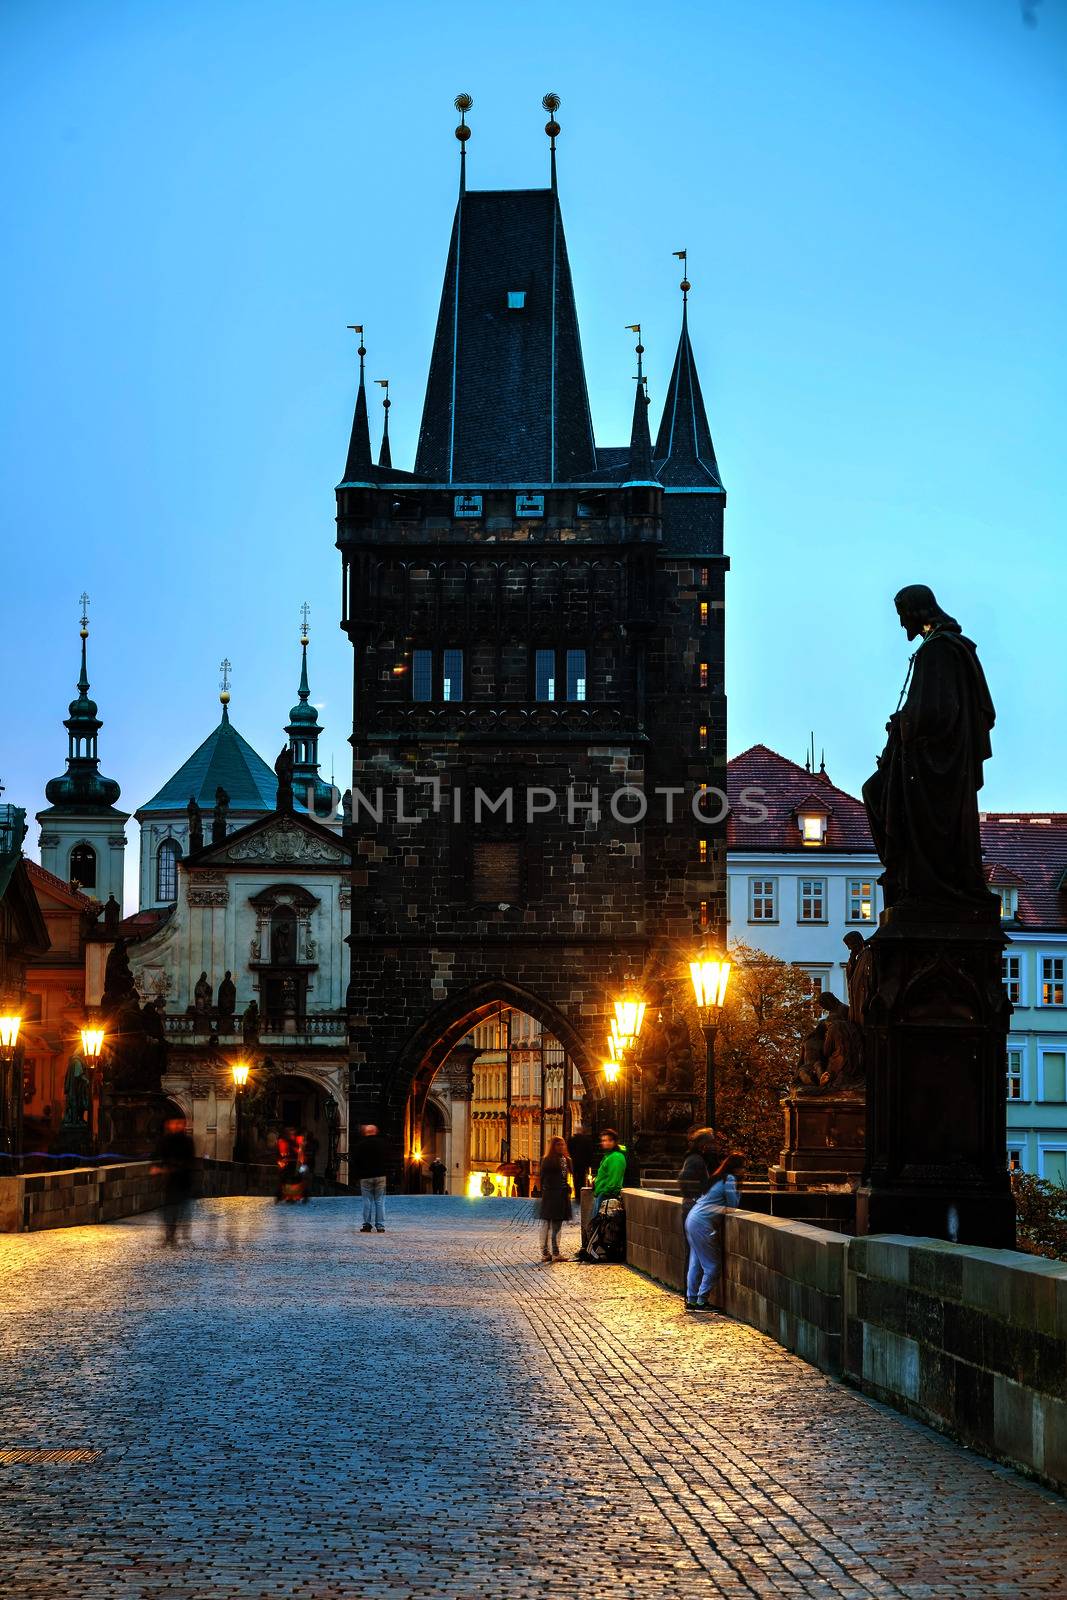 PRAGUE - OCTOBER 17: Charles bridge in the morning on October 17, 2014 in Prague. This famous historic bridge crosses the Vltava river and was constructed in the beginning of the 15th century.